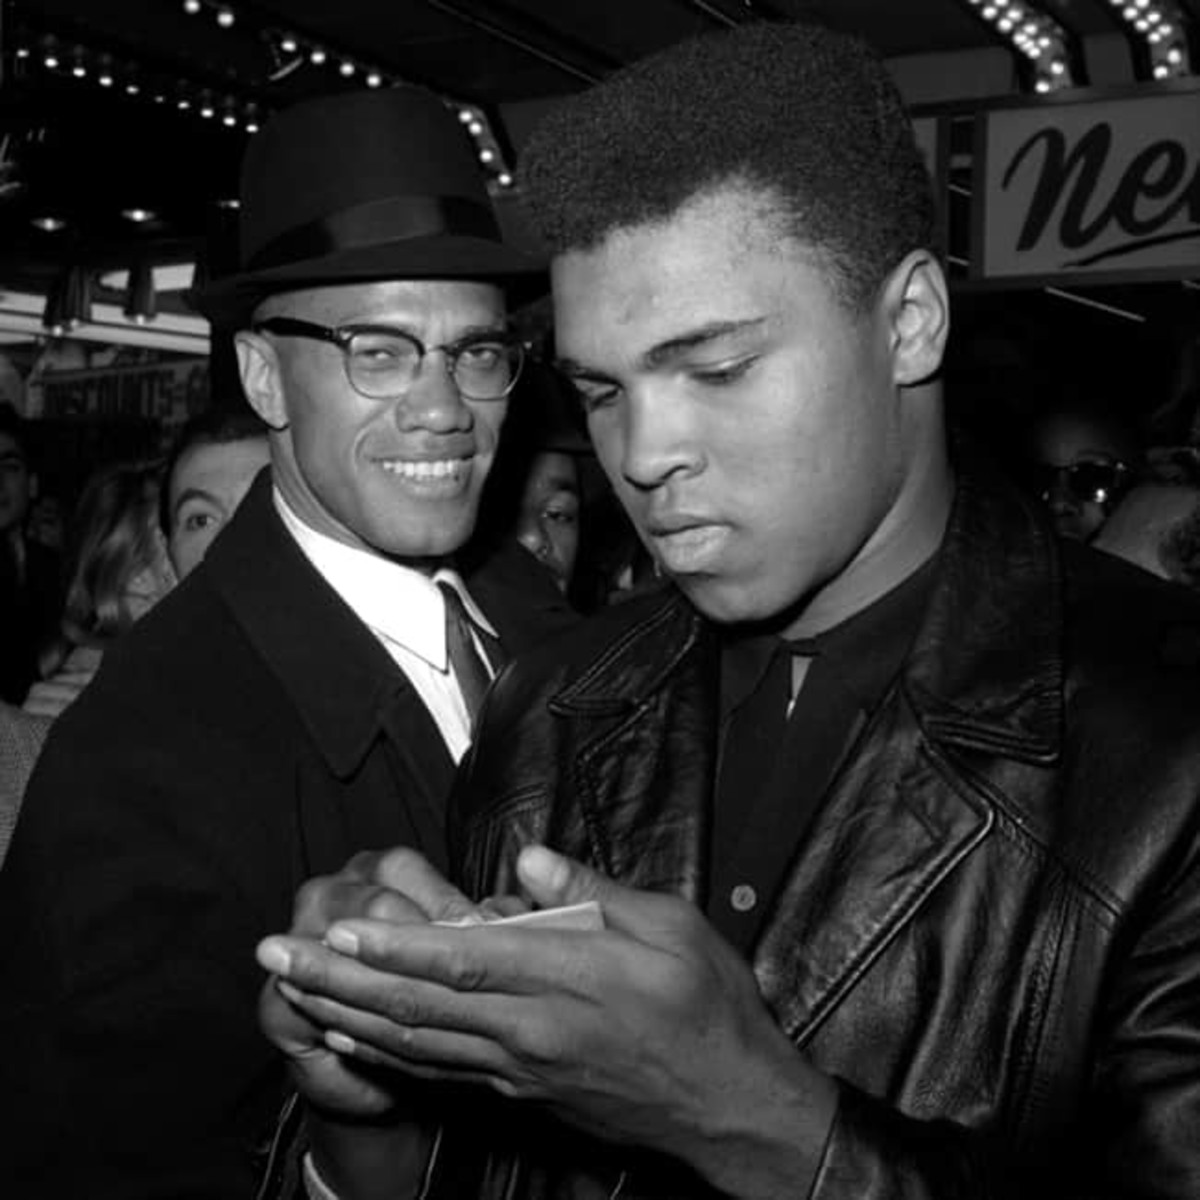 With Malcolm X next to his side and having defeated Sonny Liston the night before, he stated that his surname Clay was his “slave name.”